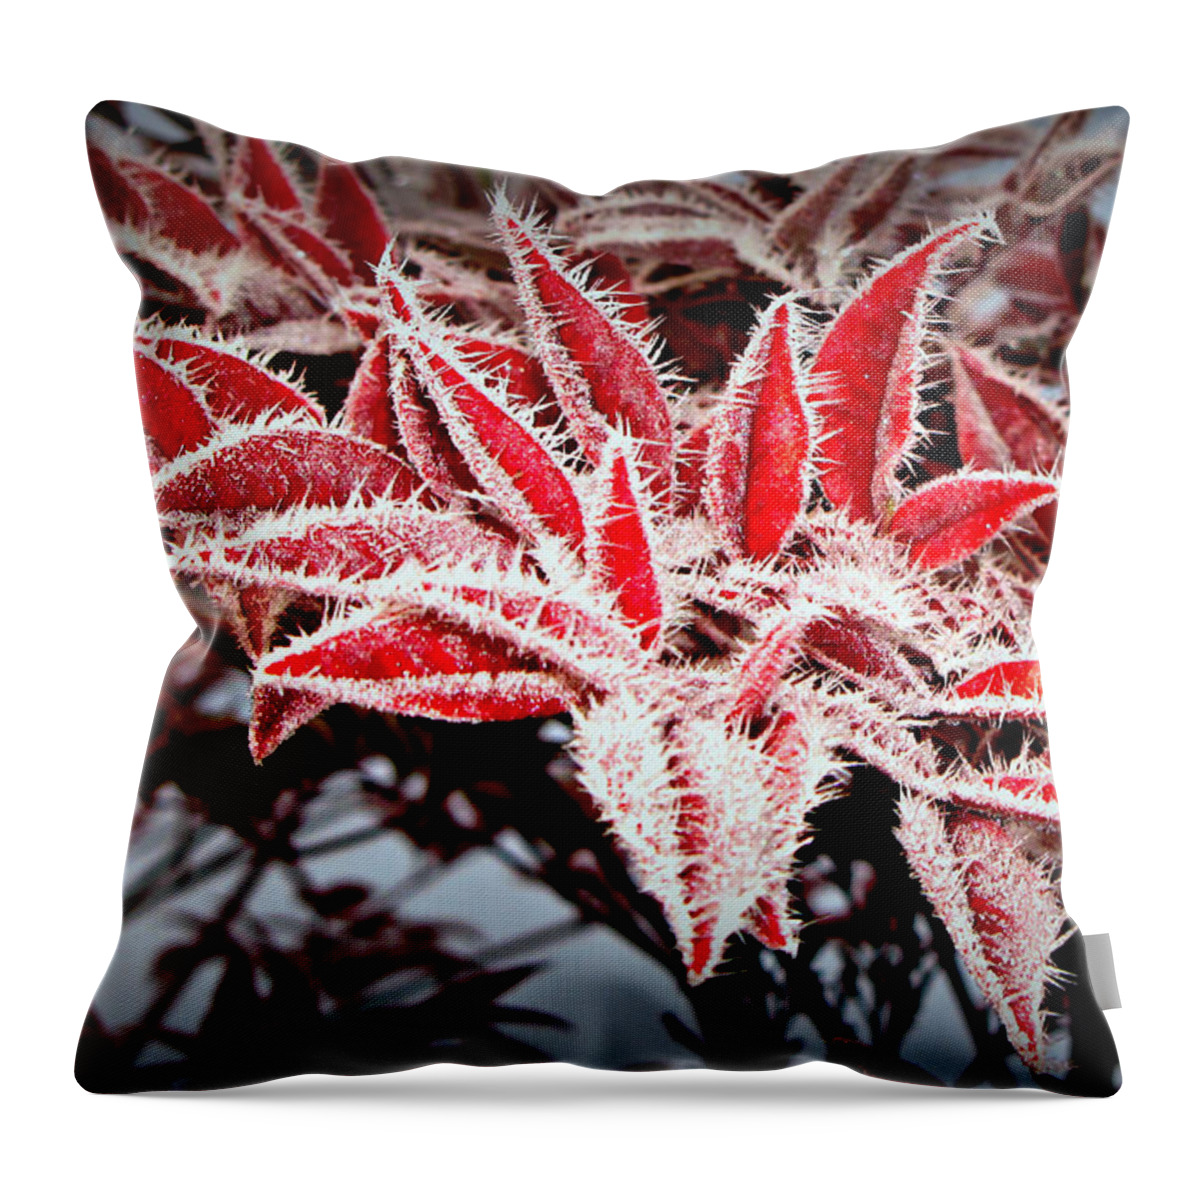 Orange Throw Pillow featuring the photograph Star Leaves by KATIE Vigil